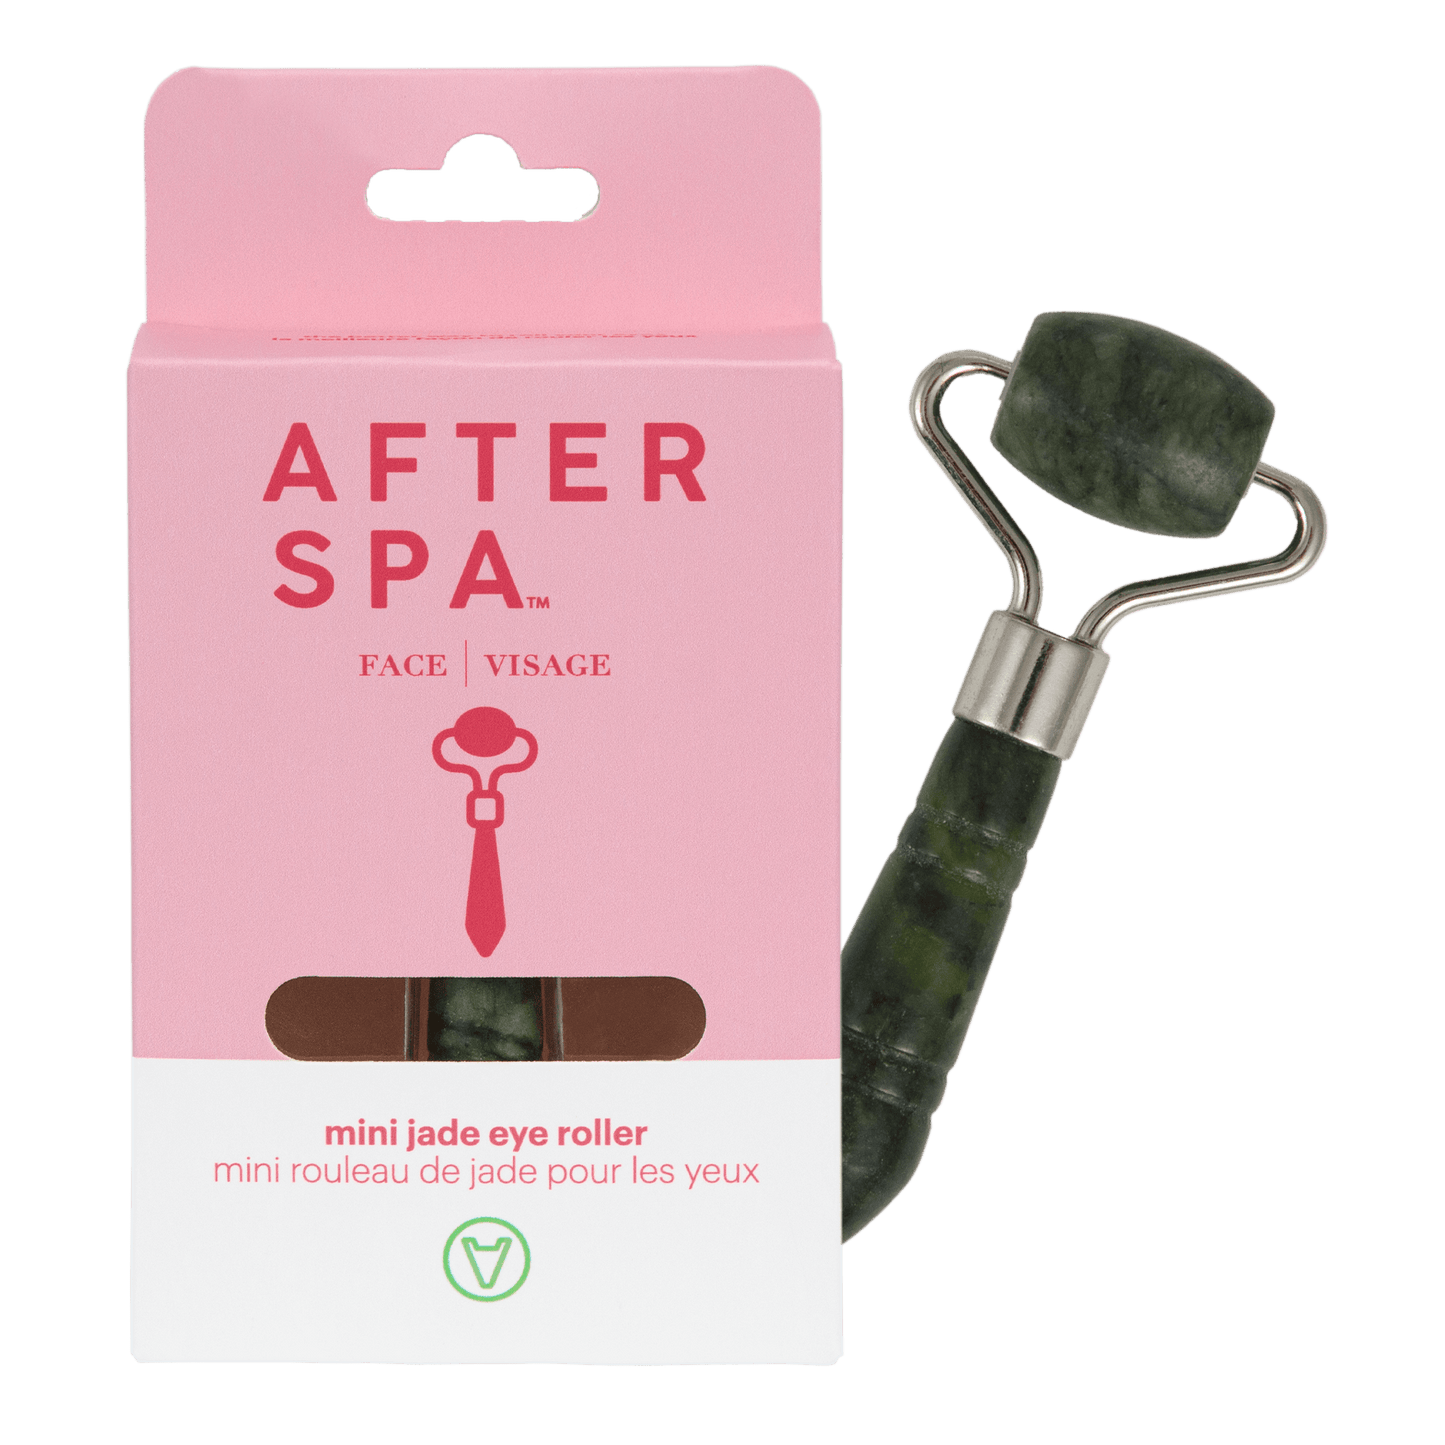 Afterspa Mini Jade Eye Roller Skincare Routine To Depuff The Eye Area